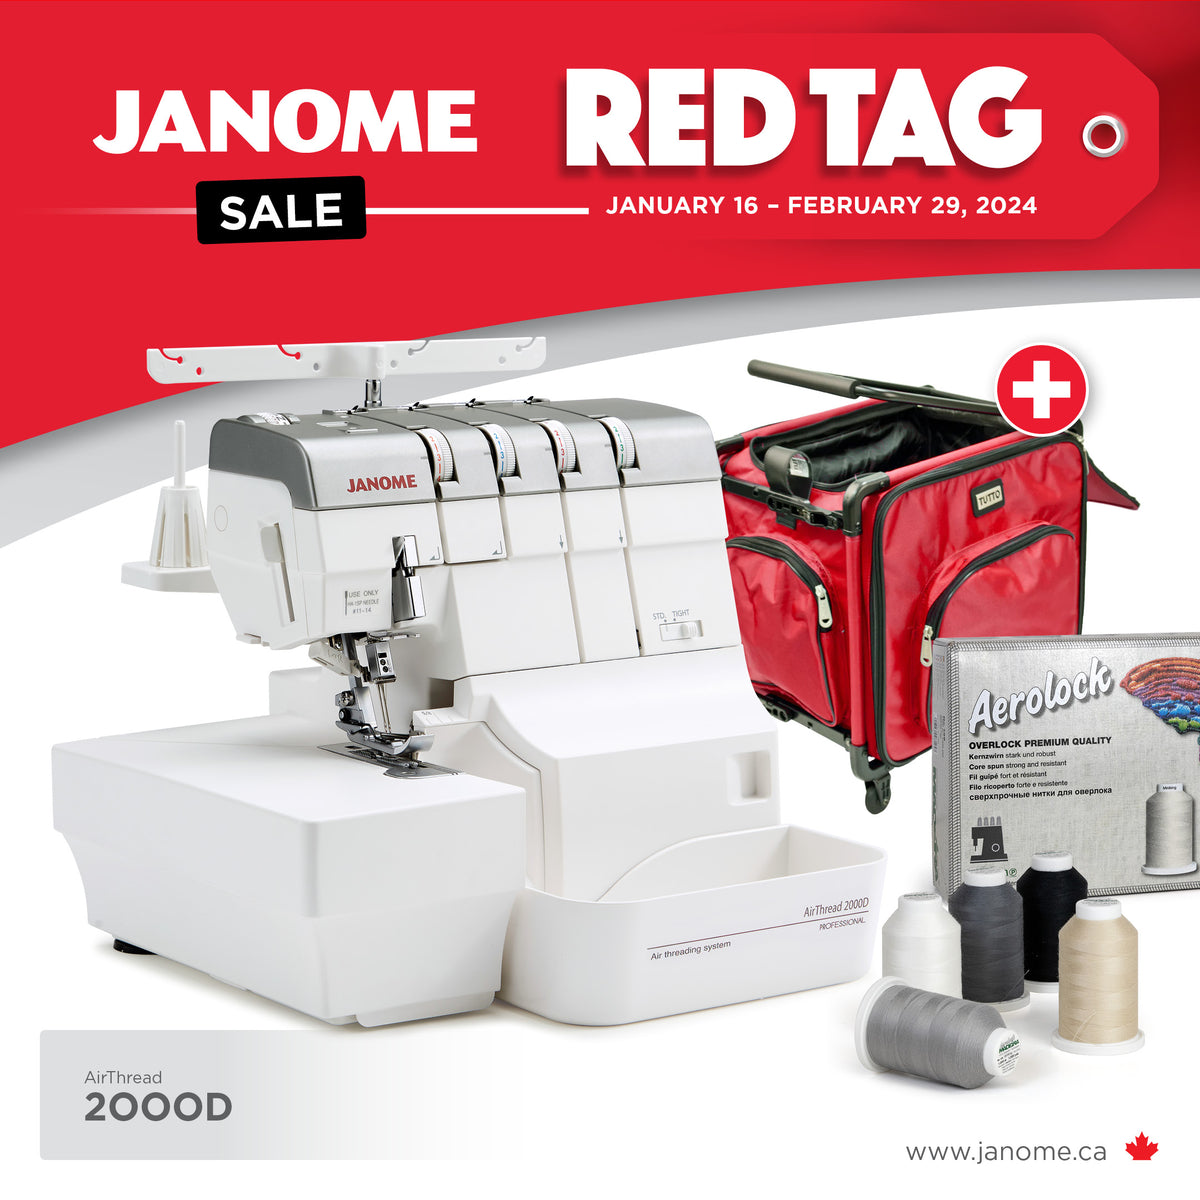 Janome AirThread 2000D Serger with RED TAG BONUS BUNDLE